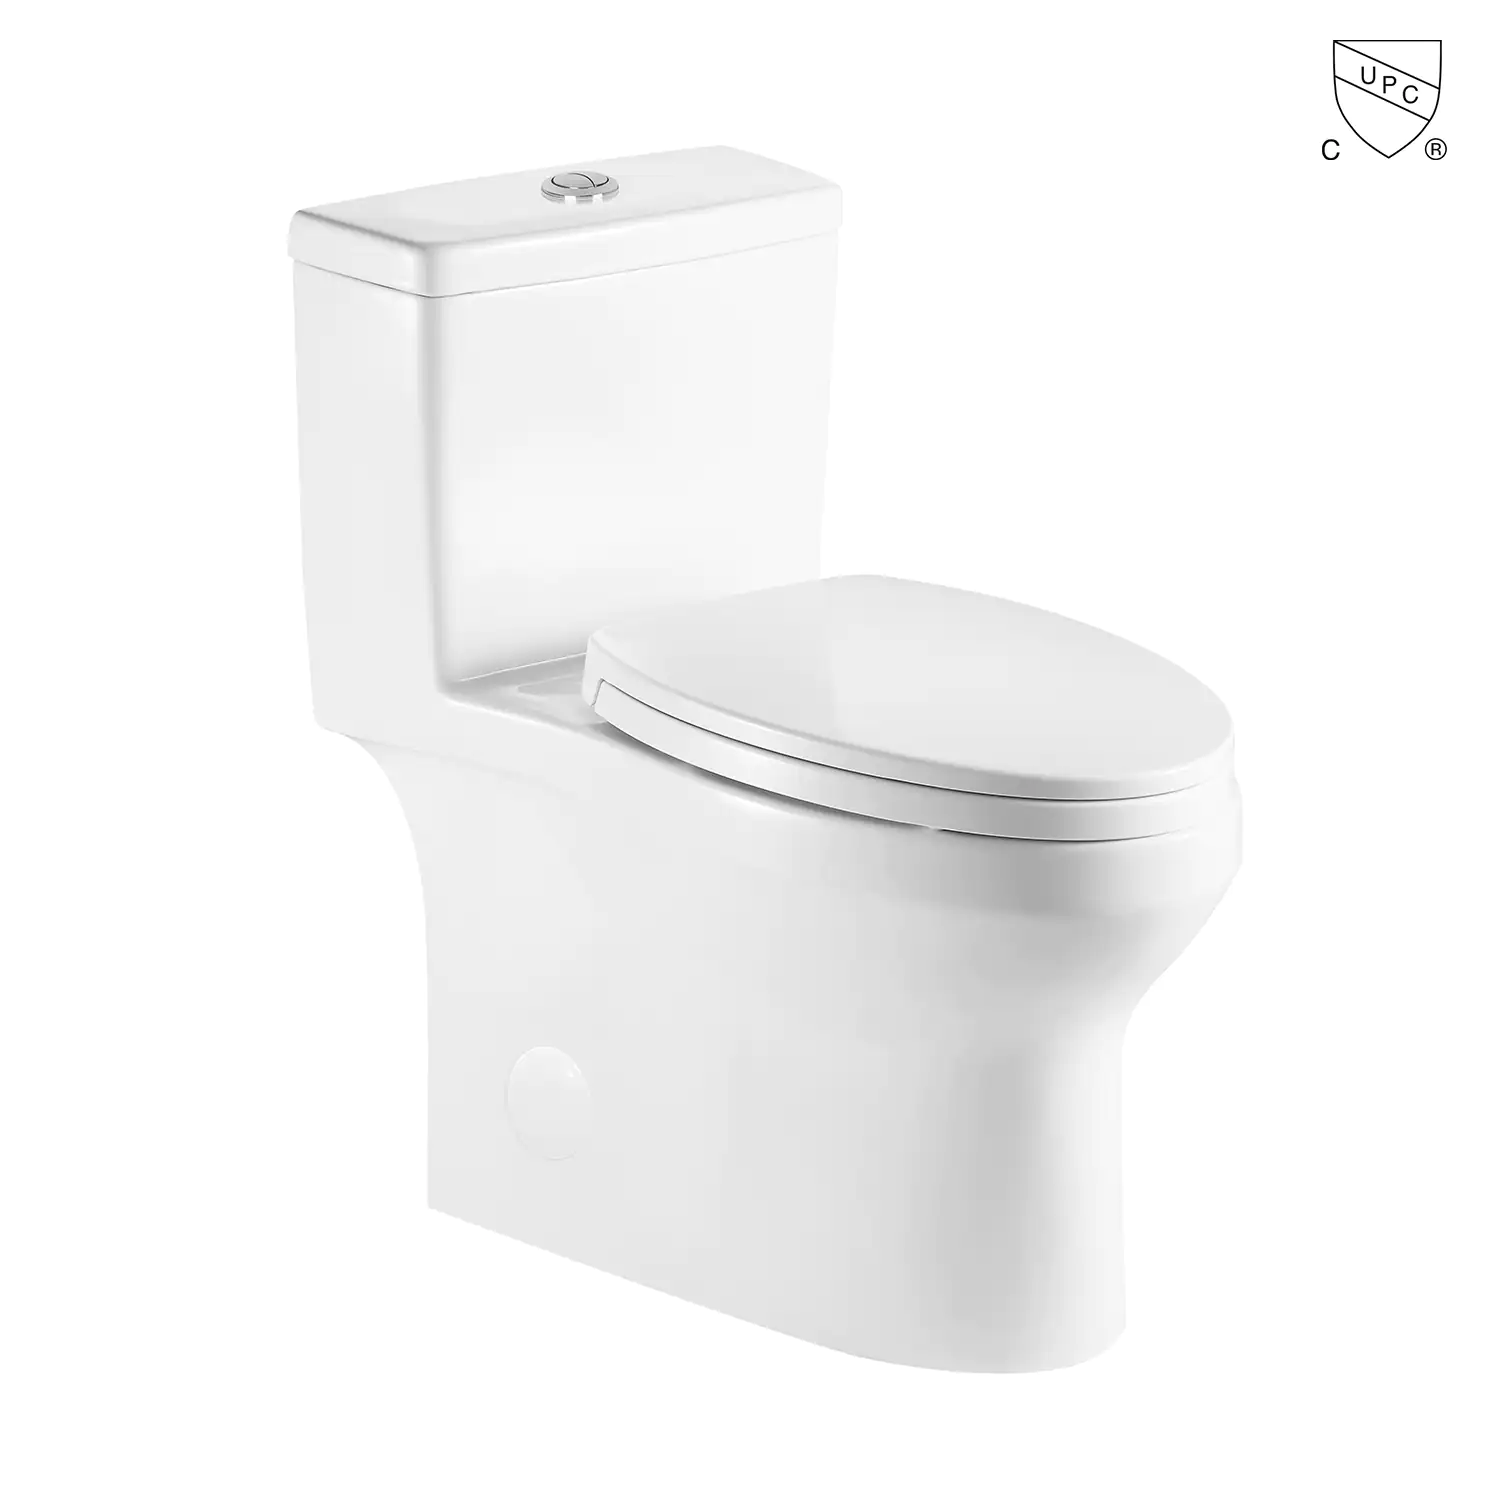 Bathroom Ceramic Fixture One Piece Skirted Elongated Toilet With Cupc Certification Easy Install And Quick Release Soft Close Seat High Efficient Back To Wall Water Closet